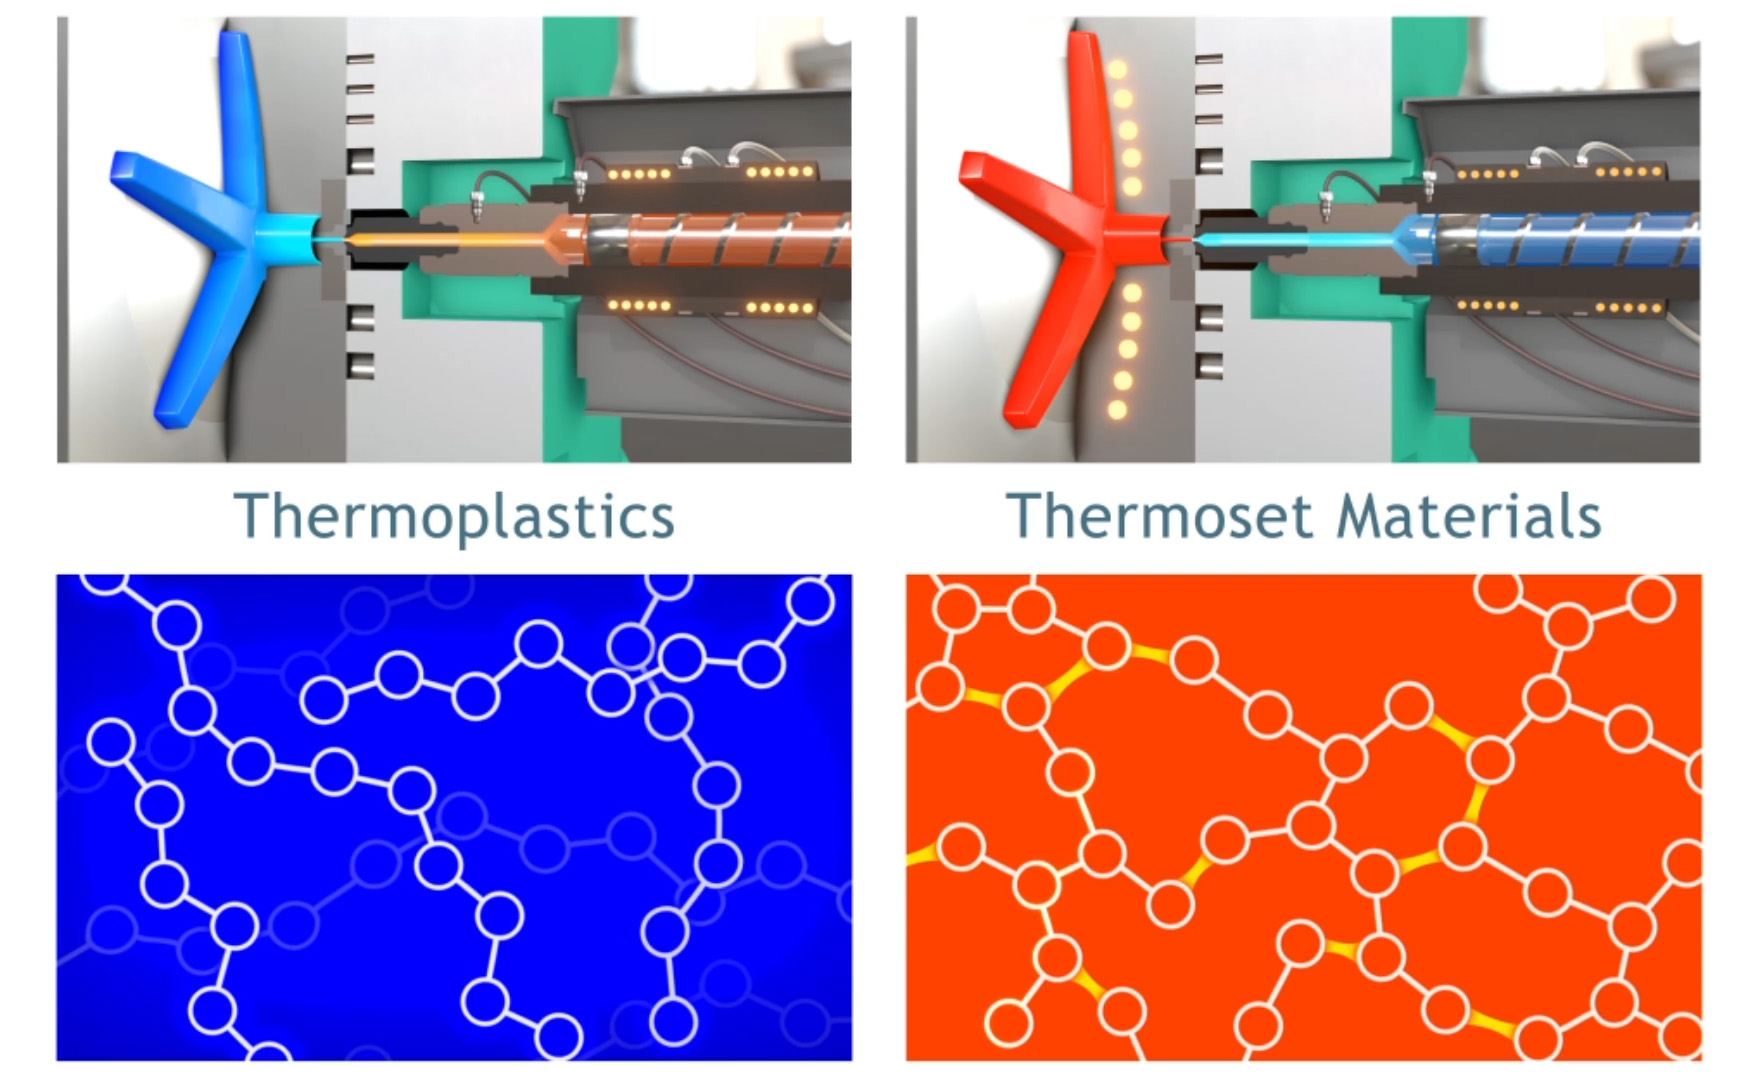 Thermoplastics and Thermoset Materials